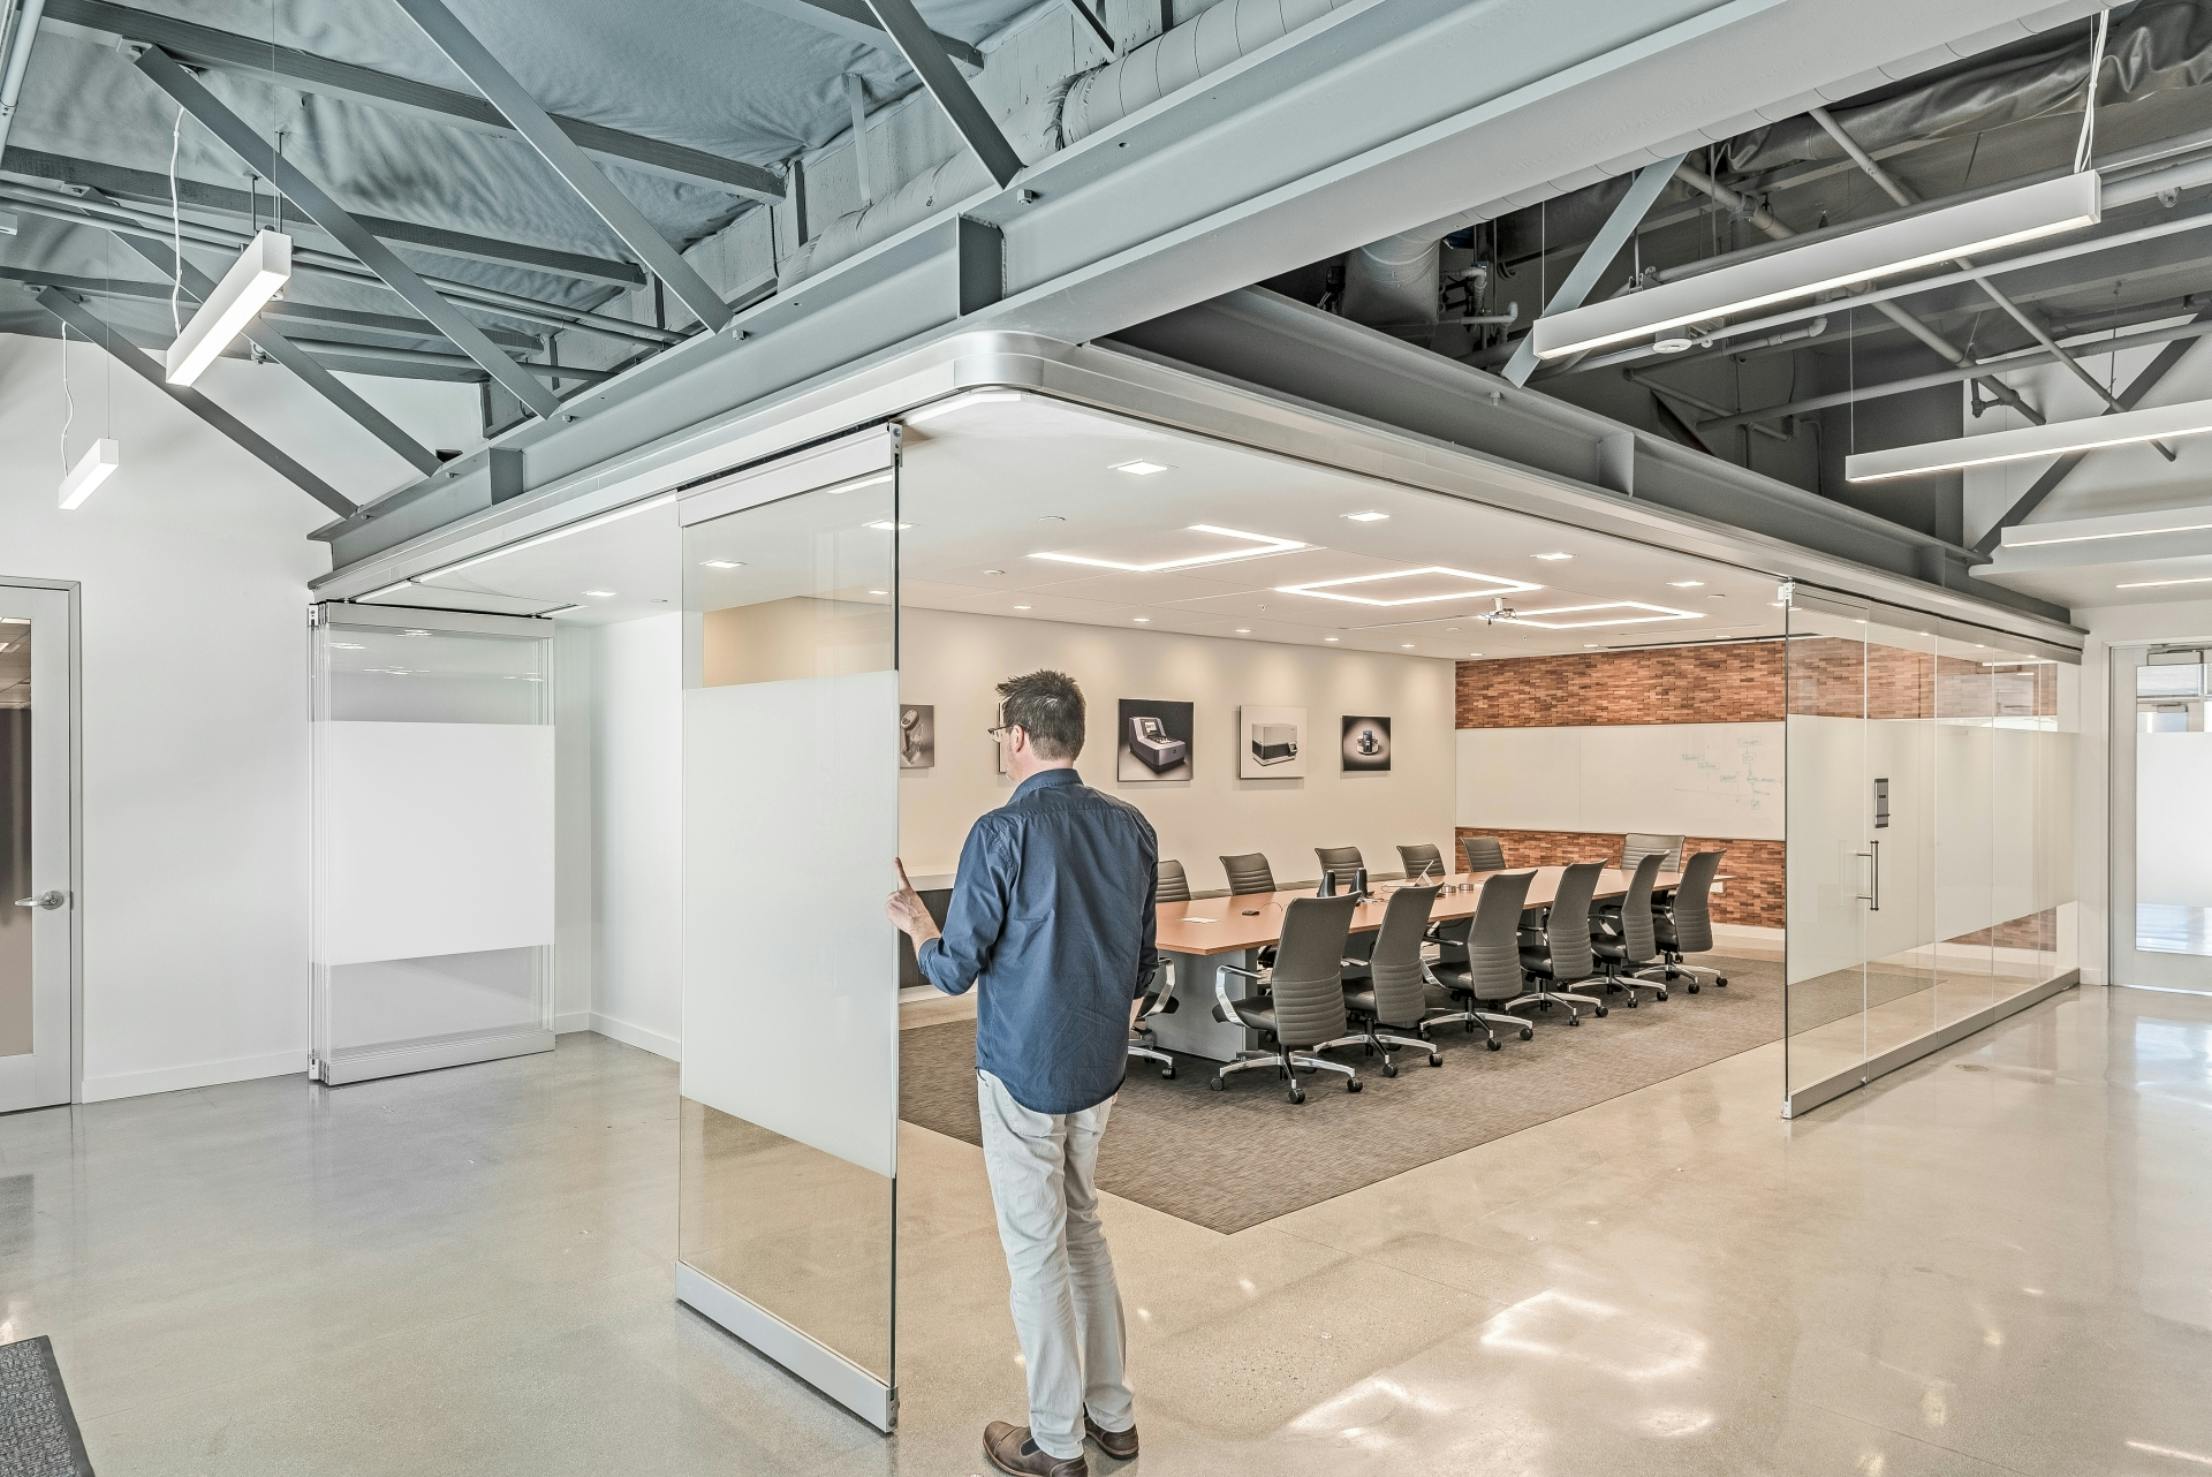 frameless retractable glass wall systems for office design